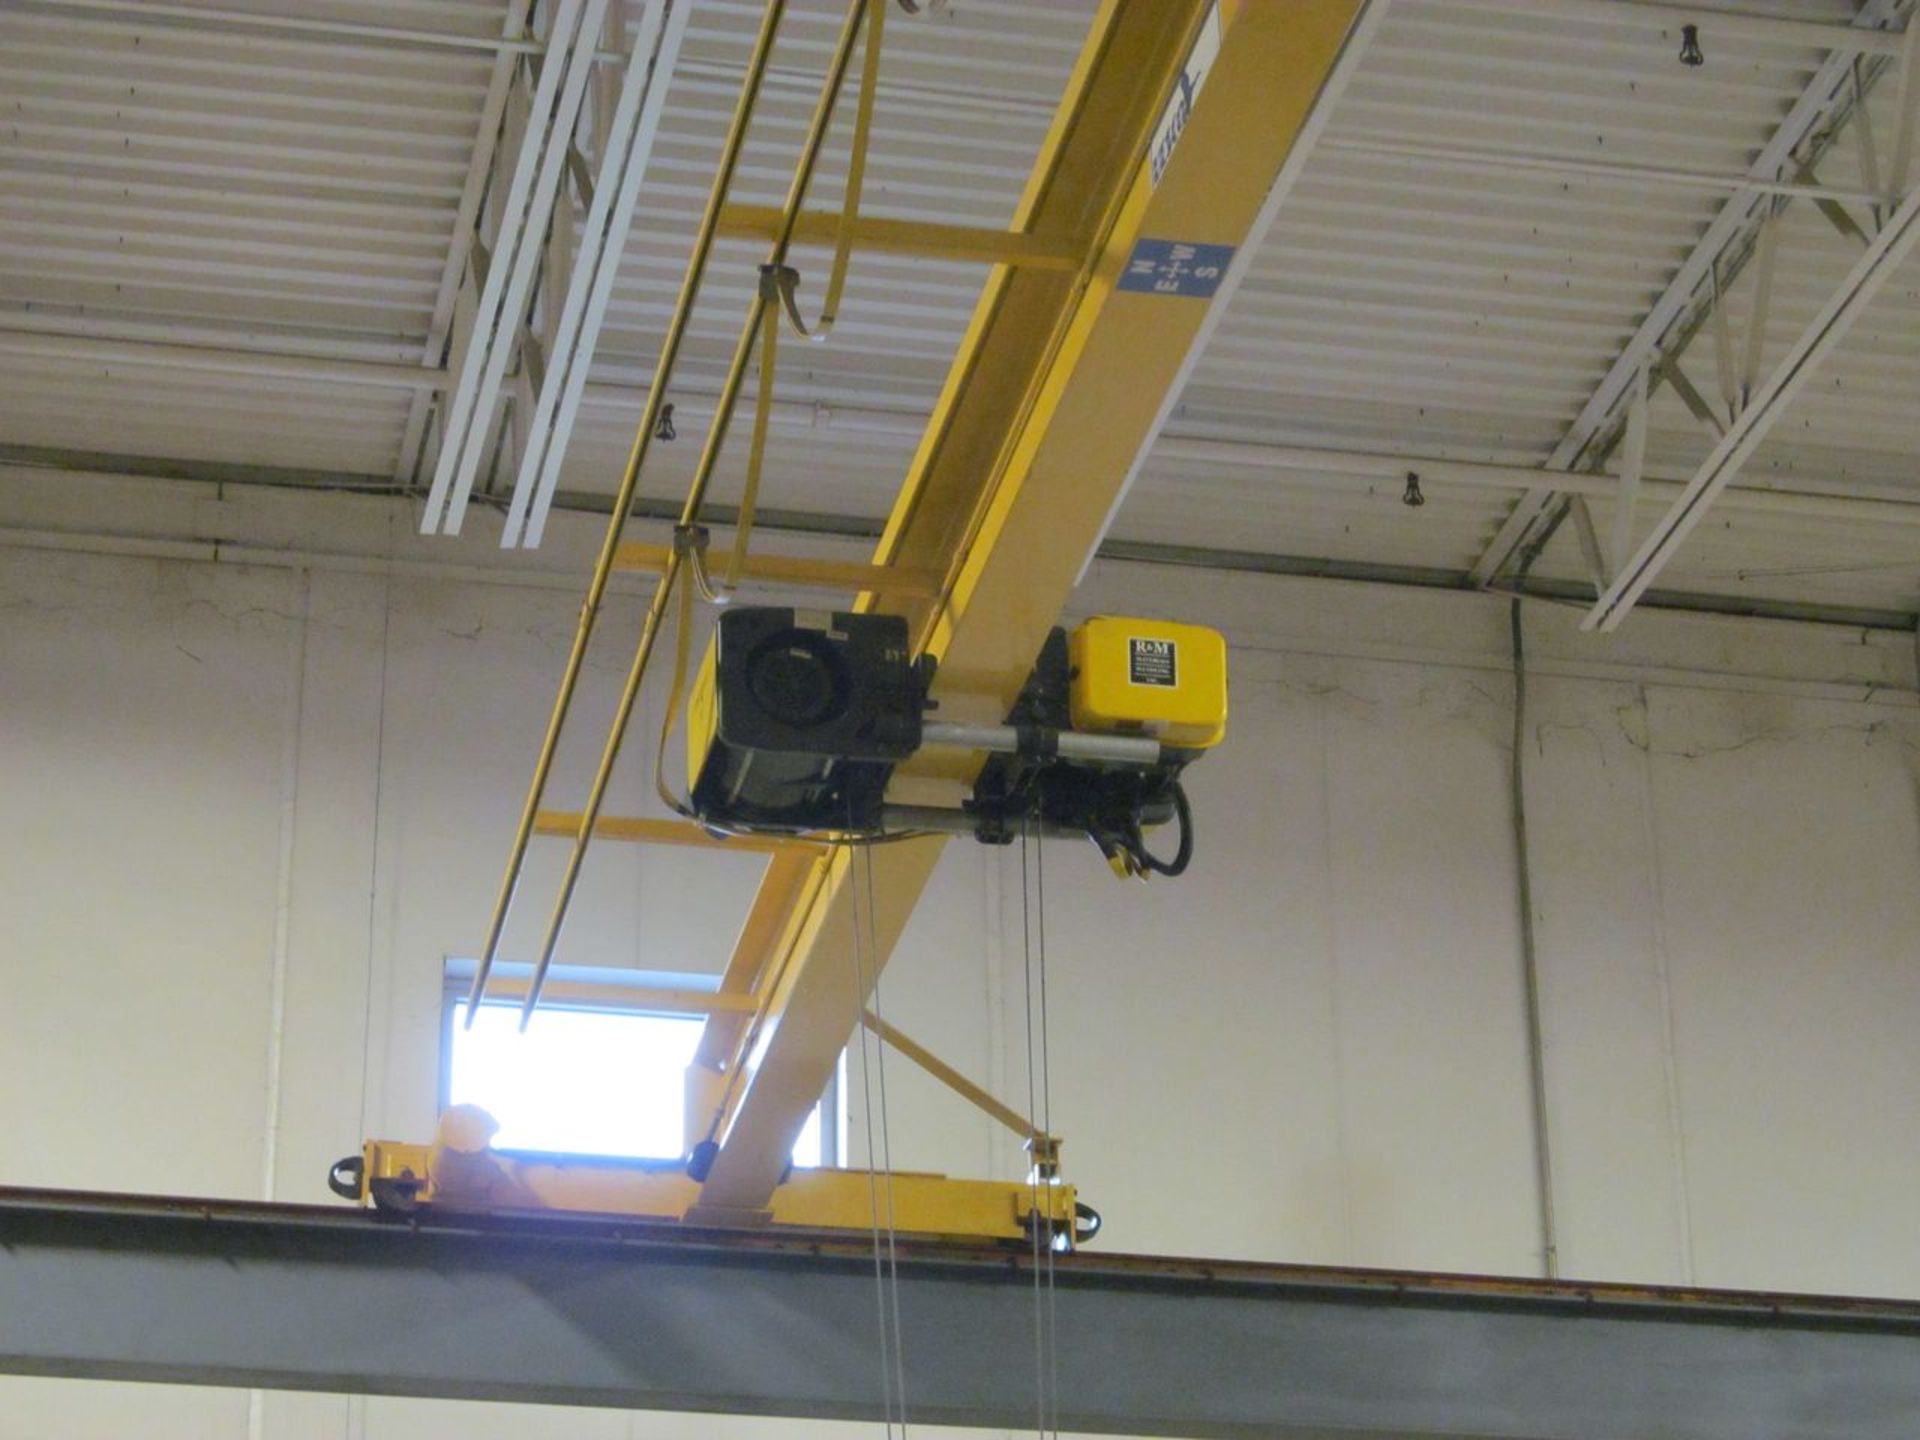 Uesco 3-Ton Capacity Free-Standing Bridge Crane System, S/N: 11-3086 (2016); with Remote Control, - Image 7 of 9